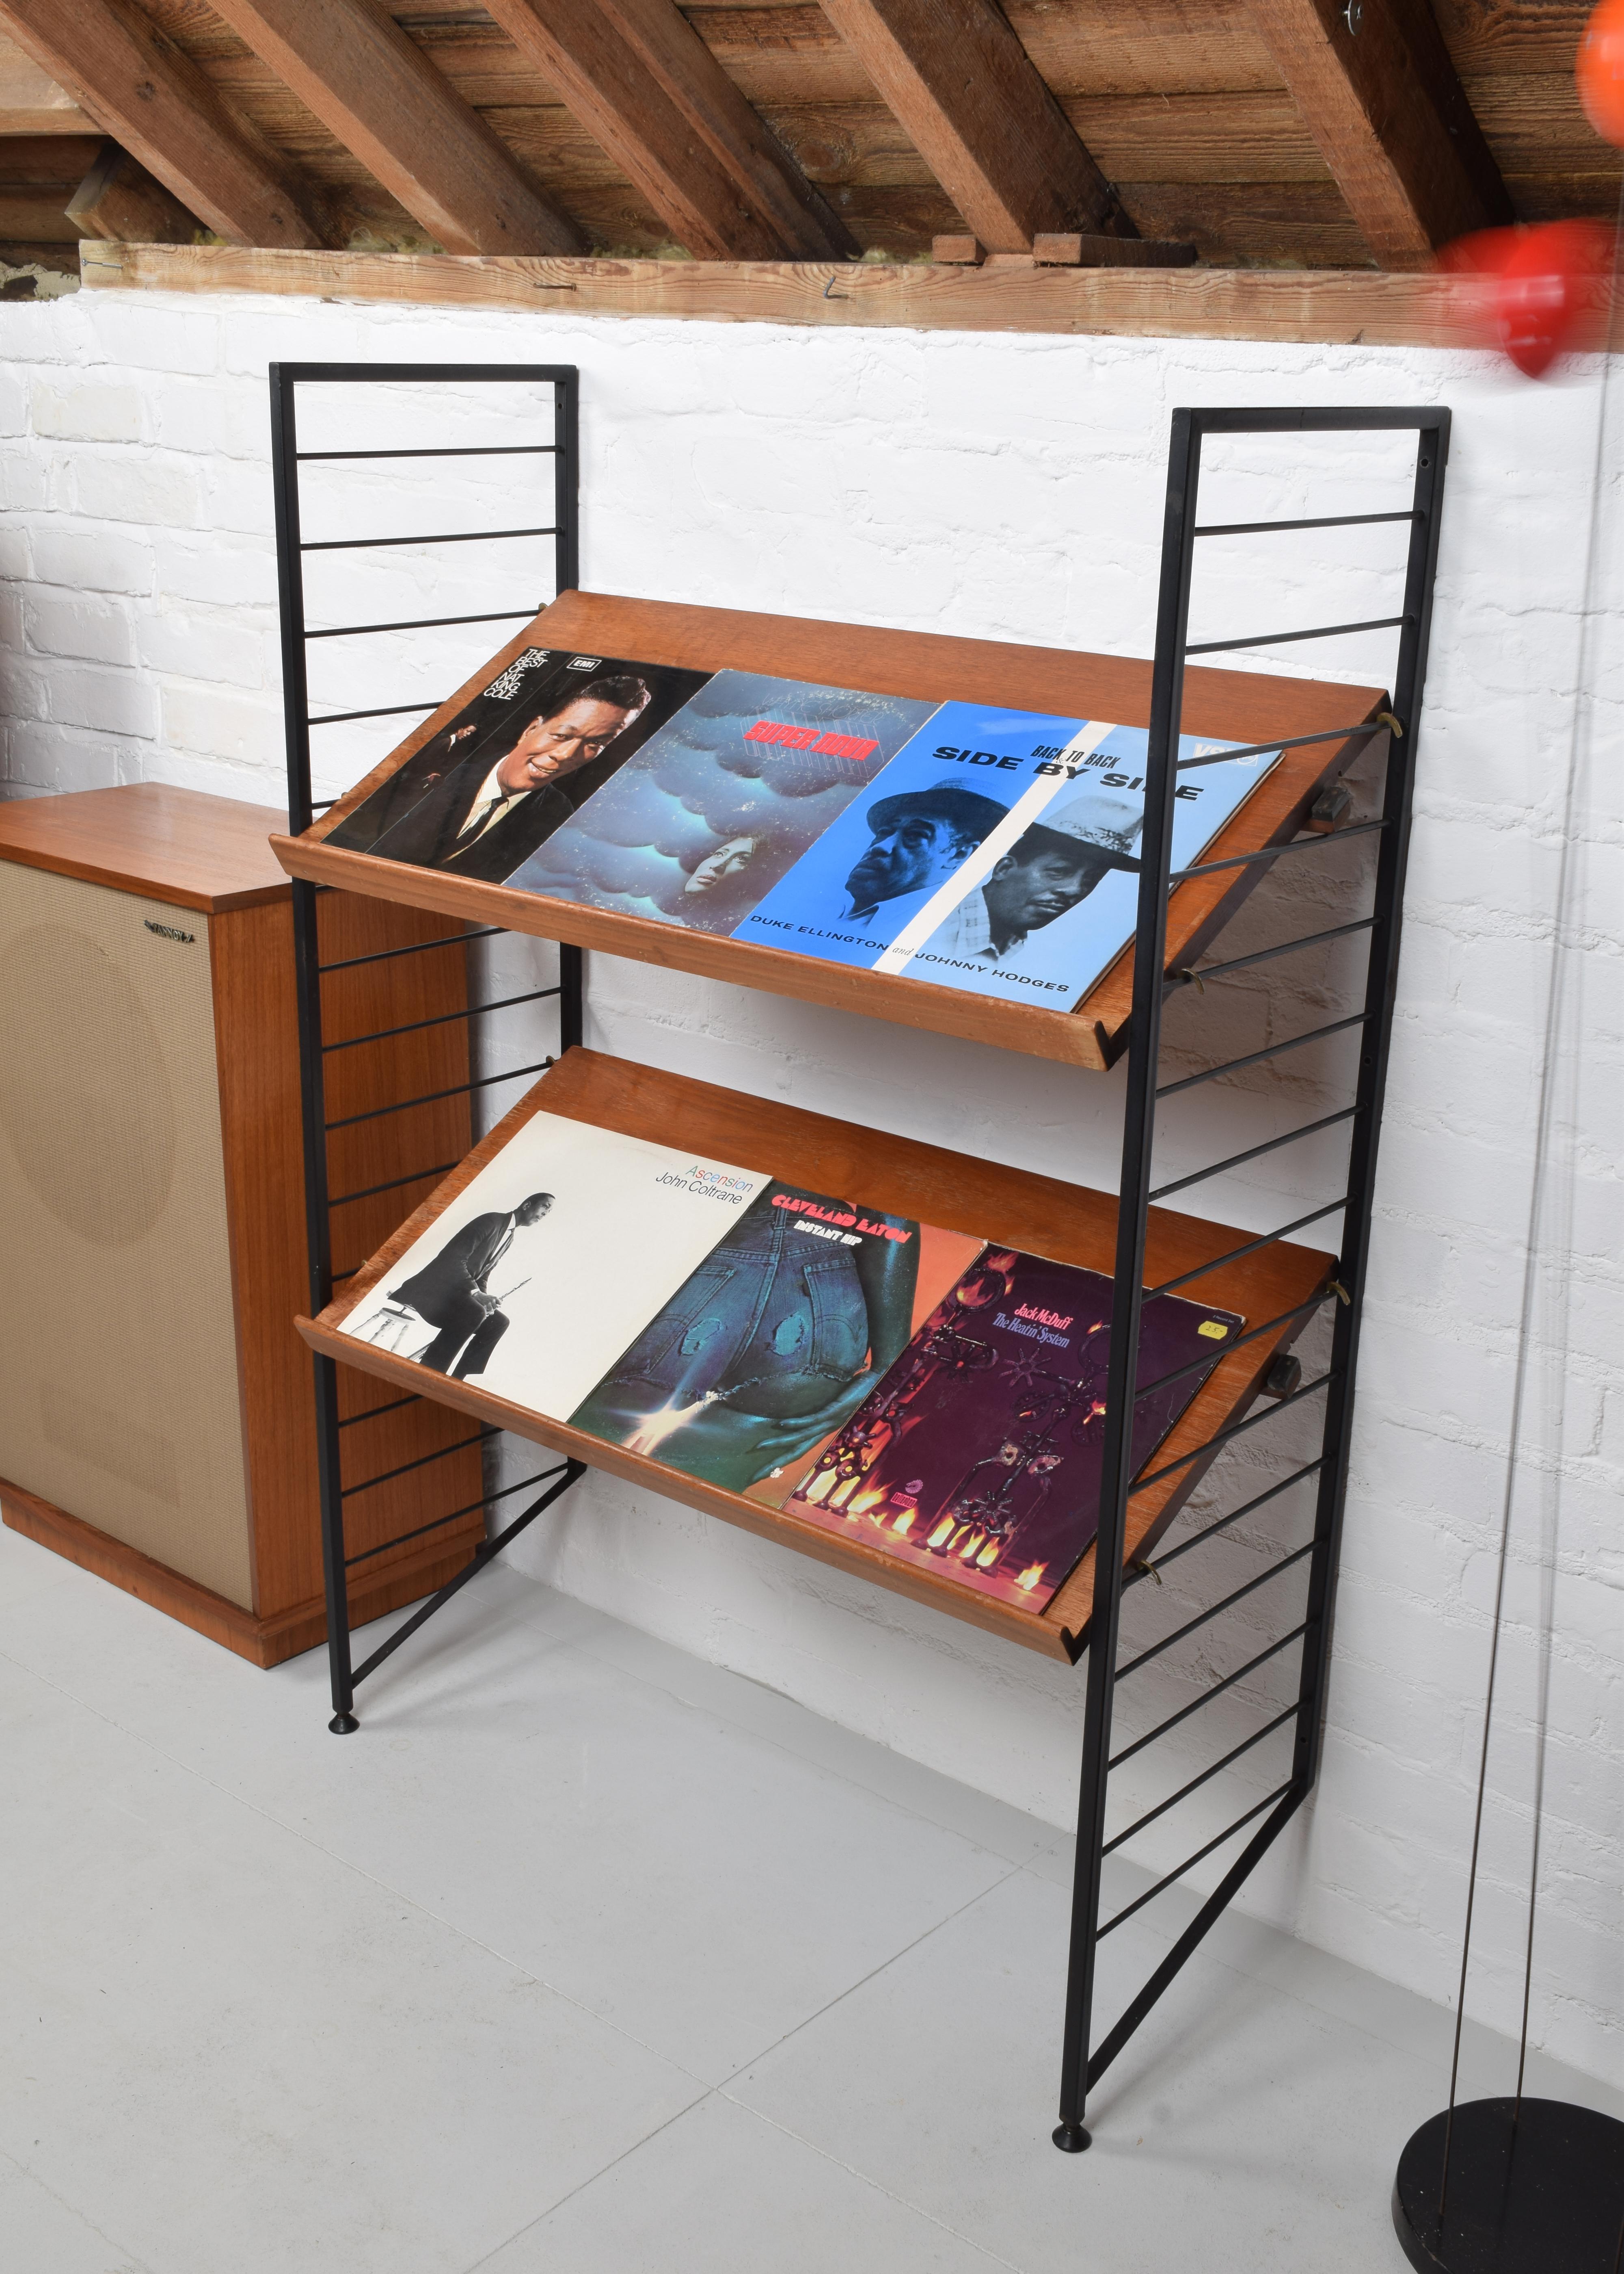 20th Century Staples Ladderax Shelving Unit, Display Shelves for Books, Magazines, Records